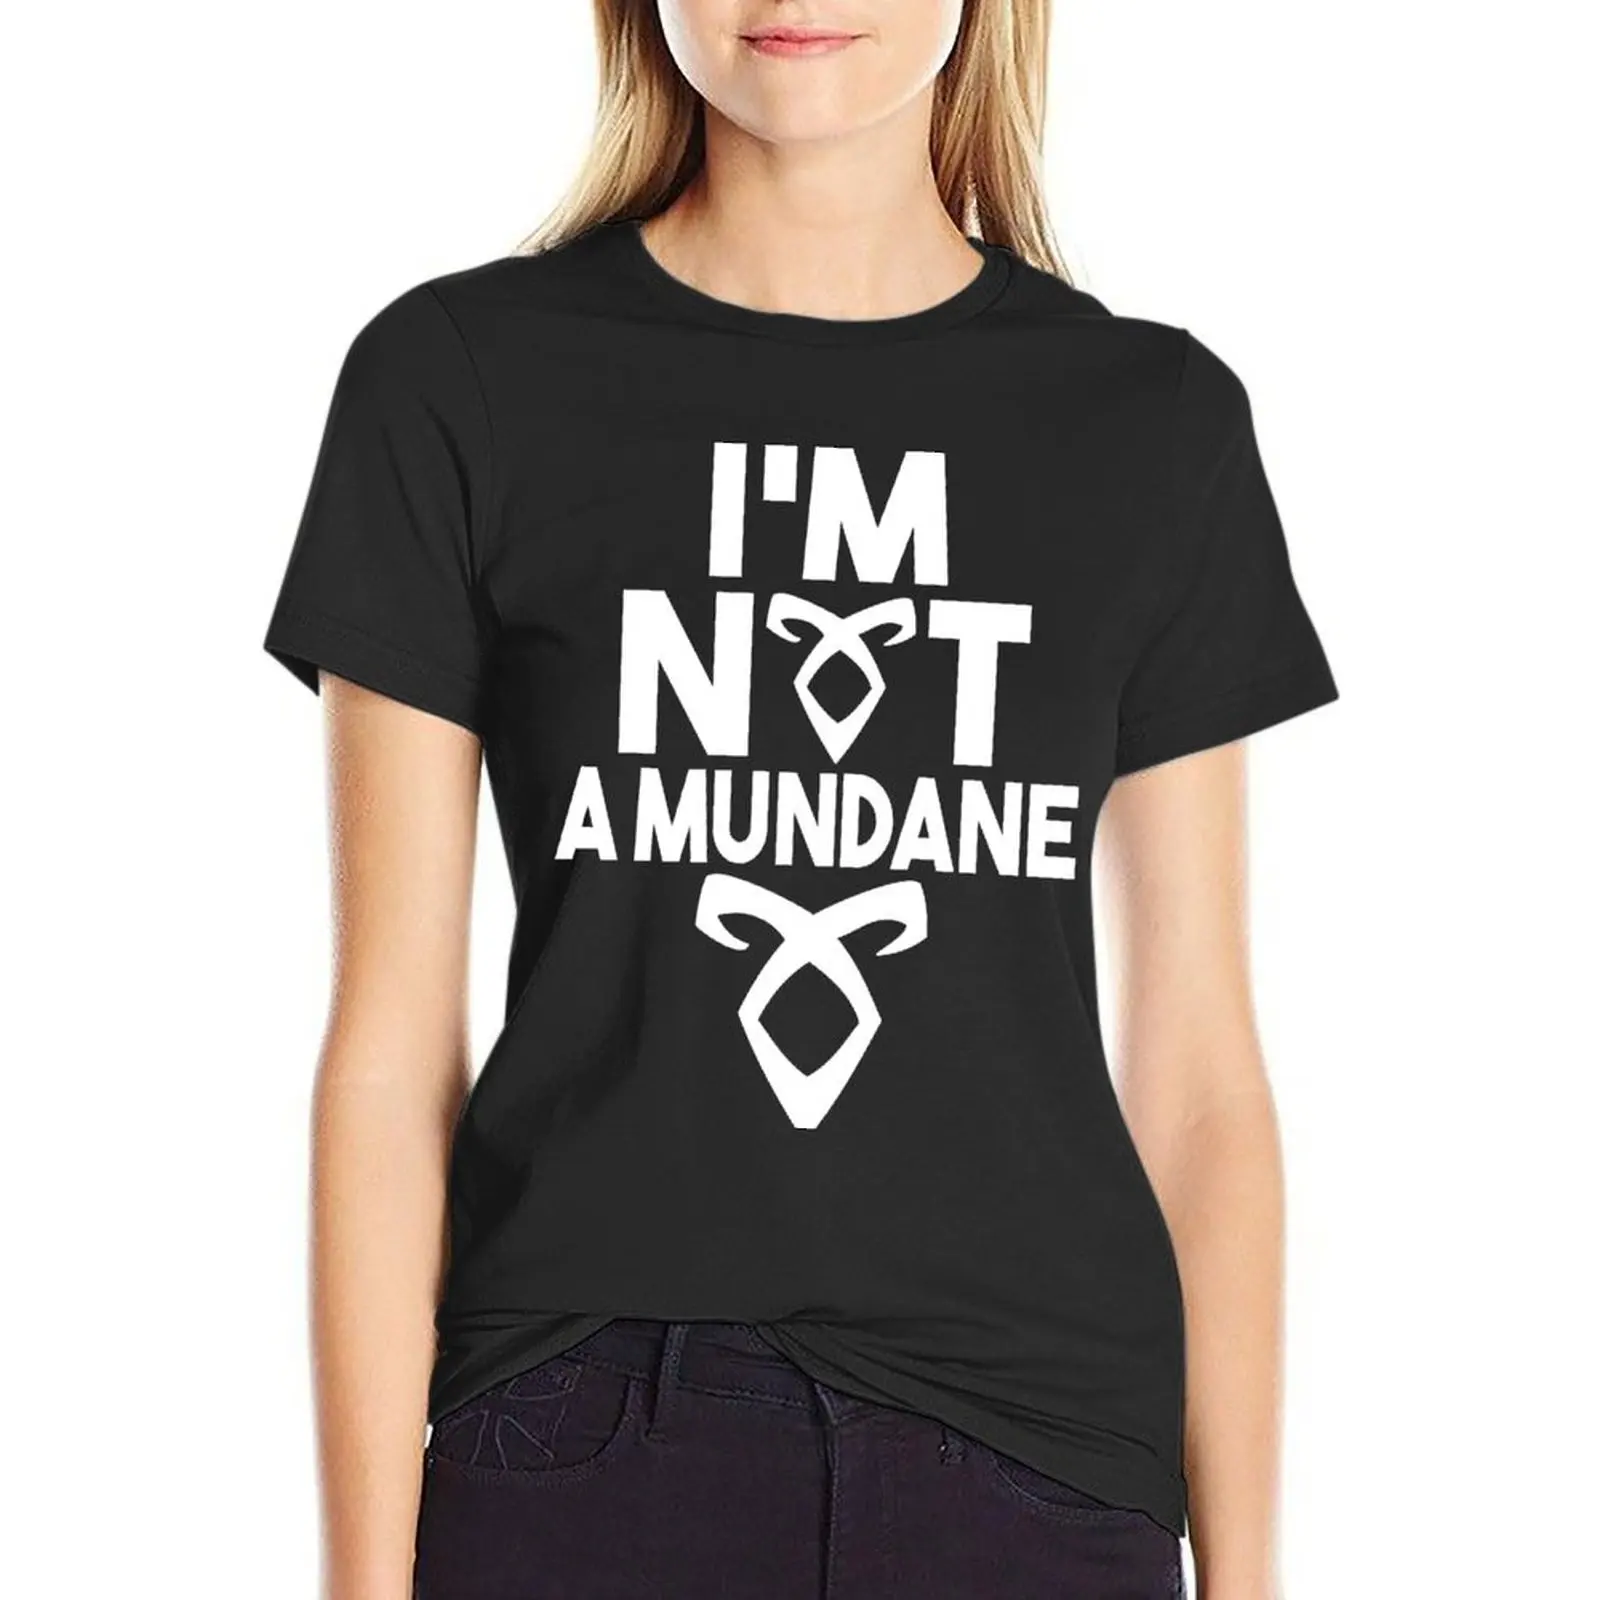 

Not a mundane v2 T-Shirt Blouse graphics female aesthetic clothes cute t-shirts for Women